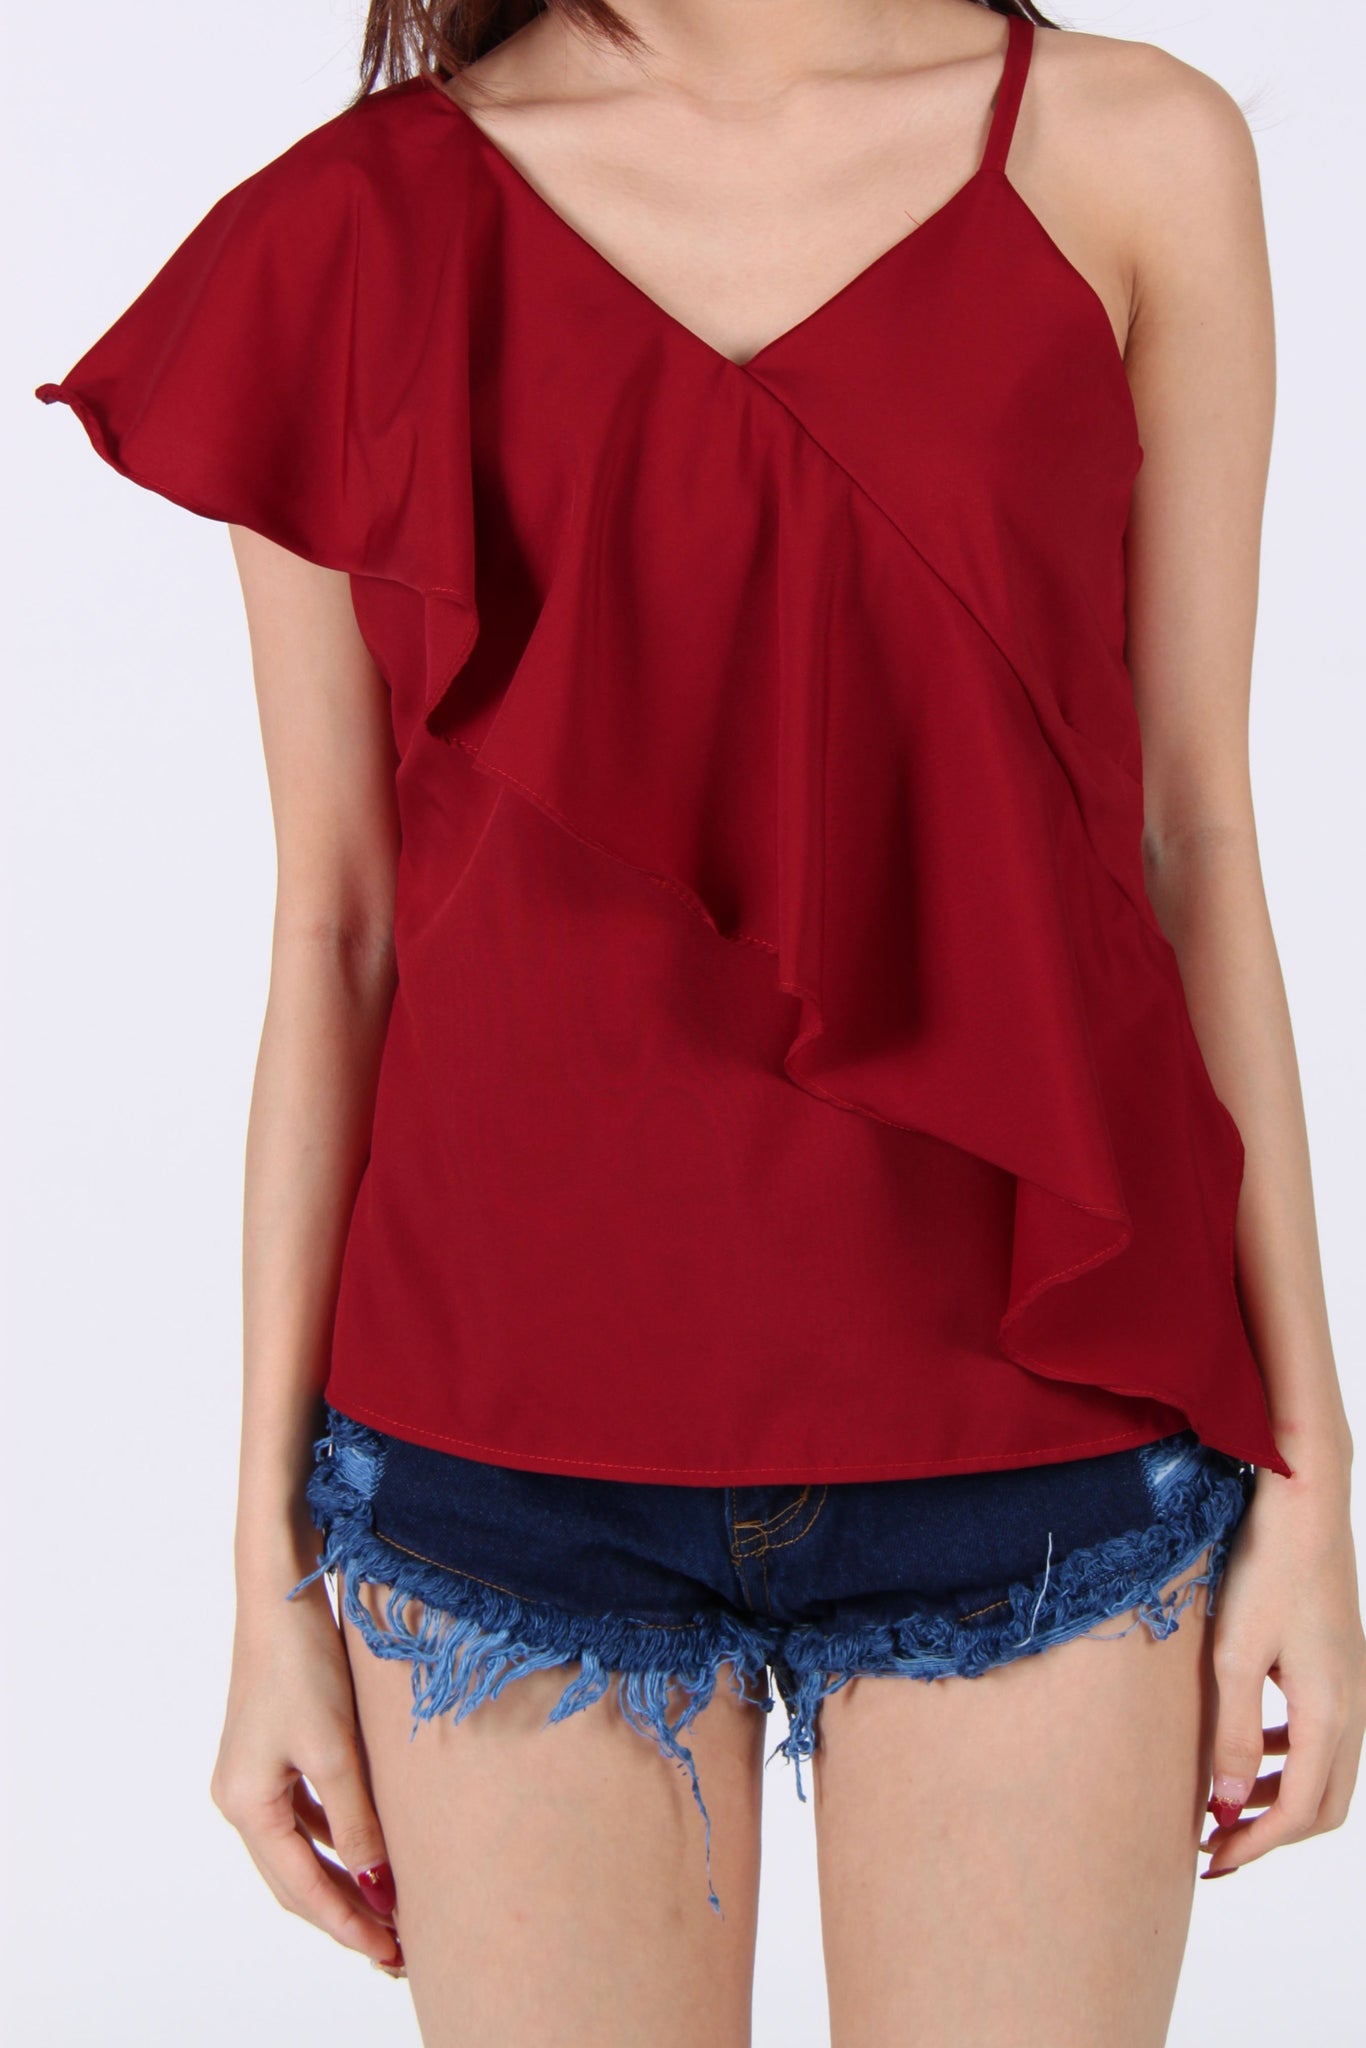 Toga Spag Ruffles Top in Maroon